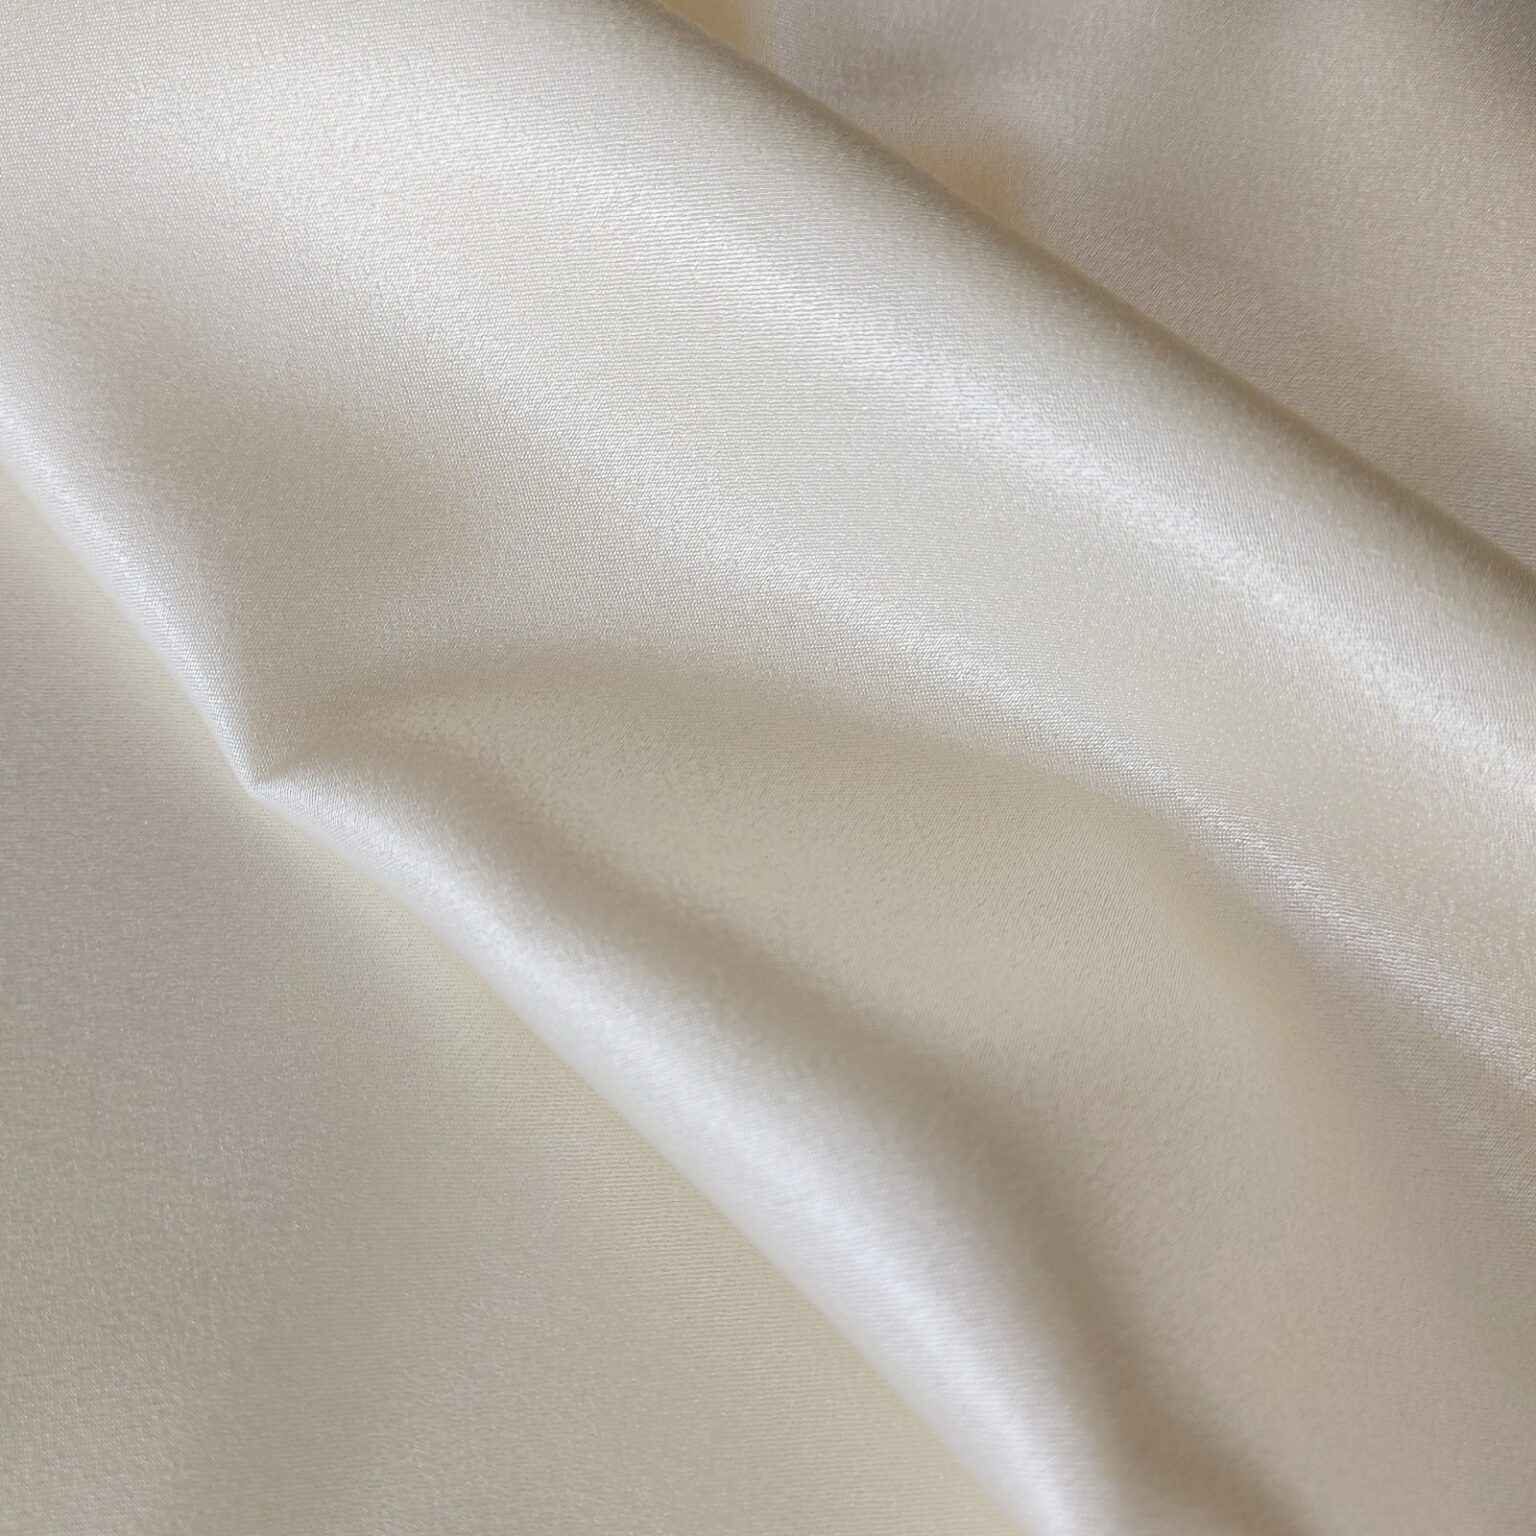 Cream polyester satin fabric | More Sewing